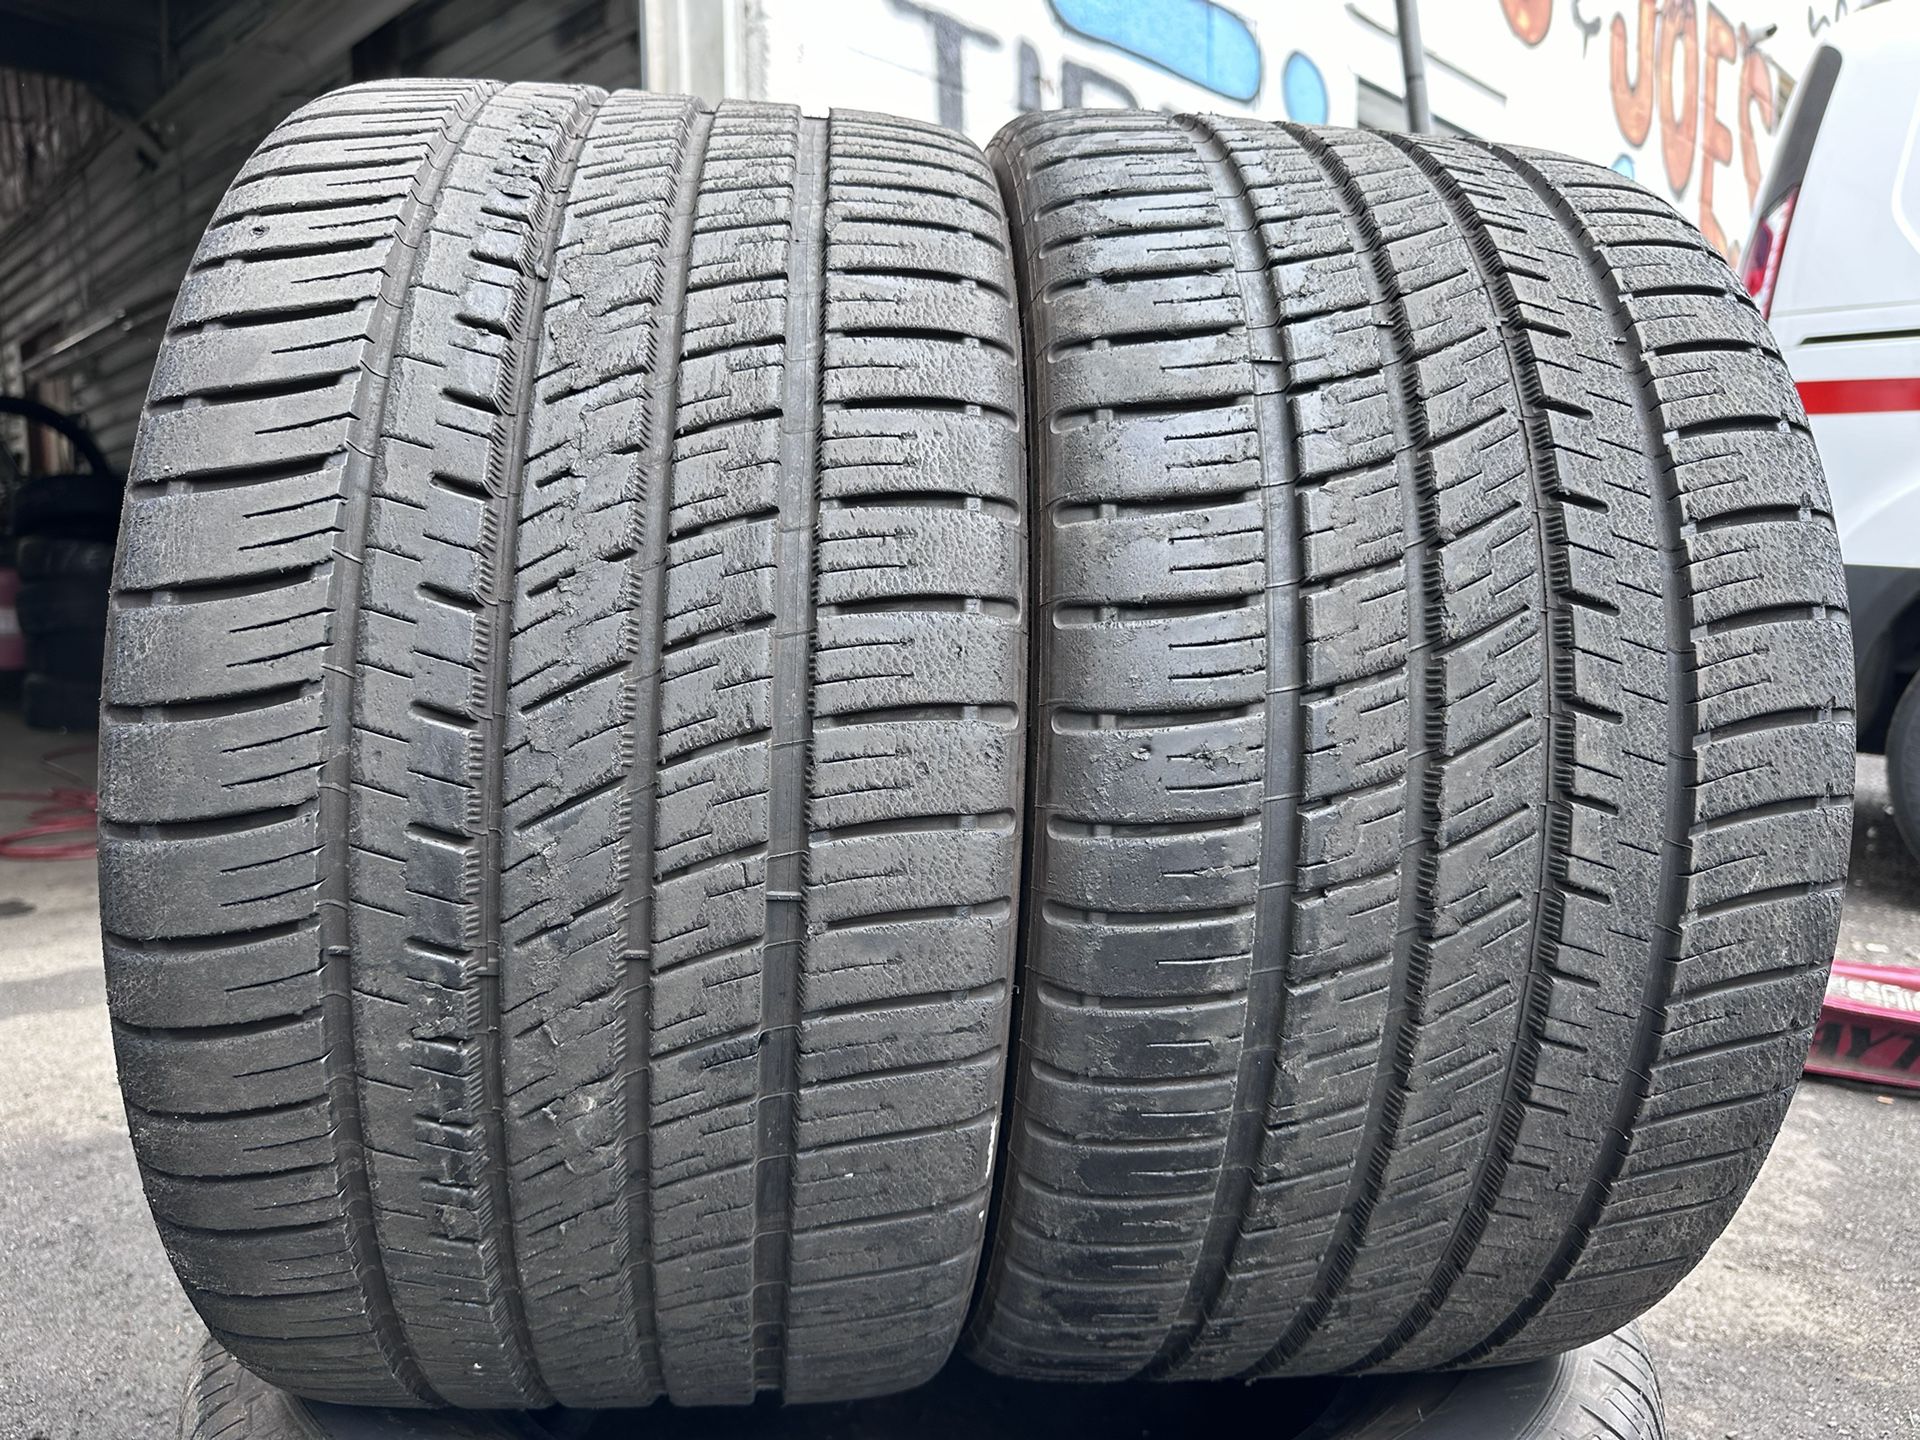 2 Used 285/30/19 Michelin Pilot Sport AS3+ Tires 